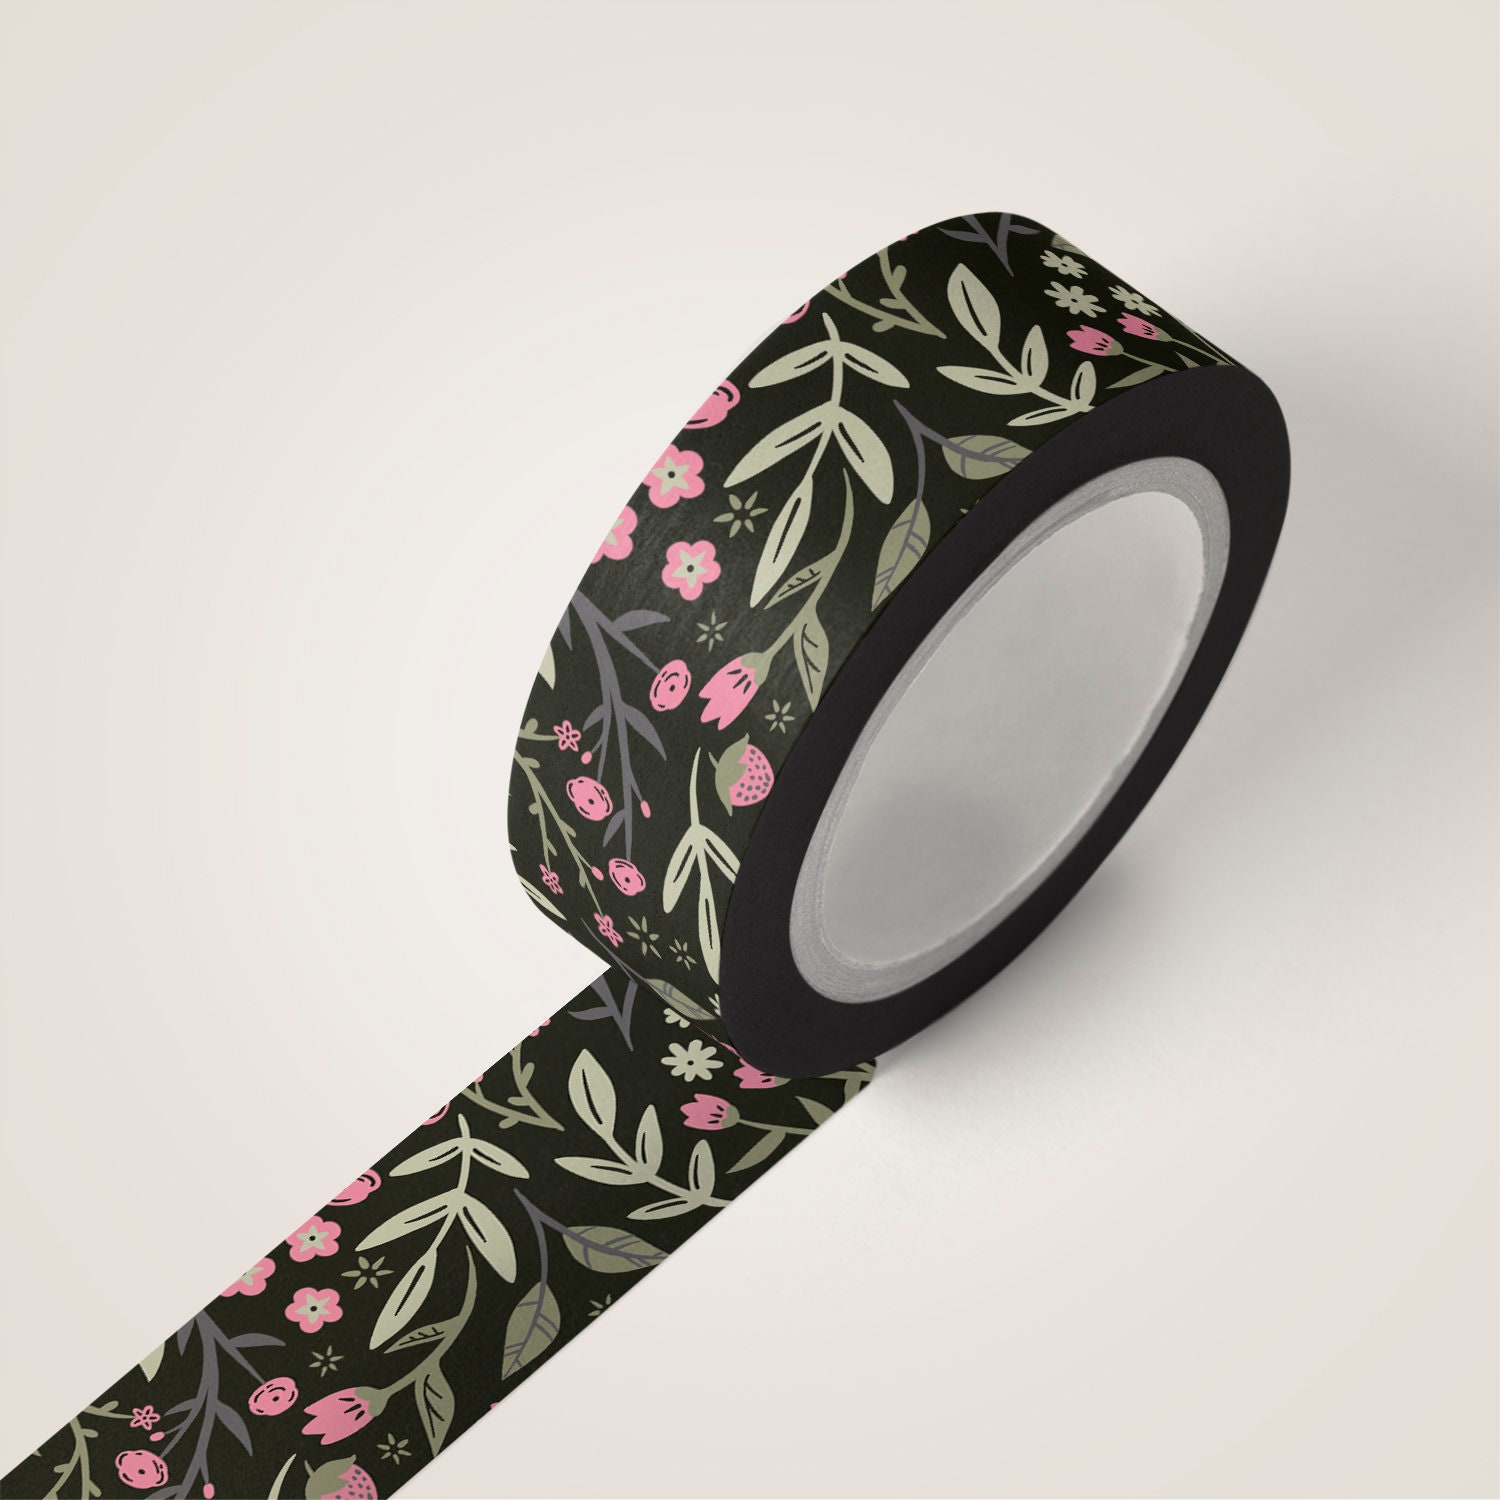 Stem-tex Florist Tape 27 M Lenght, 13 Mm Wide, Dark Green, Buttonholes, DIY  Floral Arragements, Bouquets, Cake Toppers, Crafting Tape 